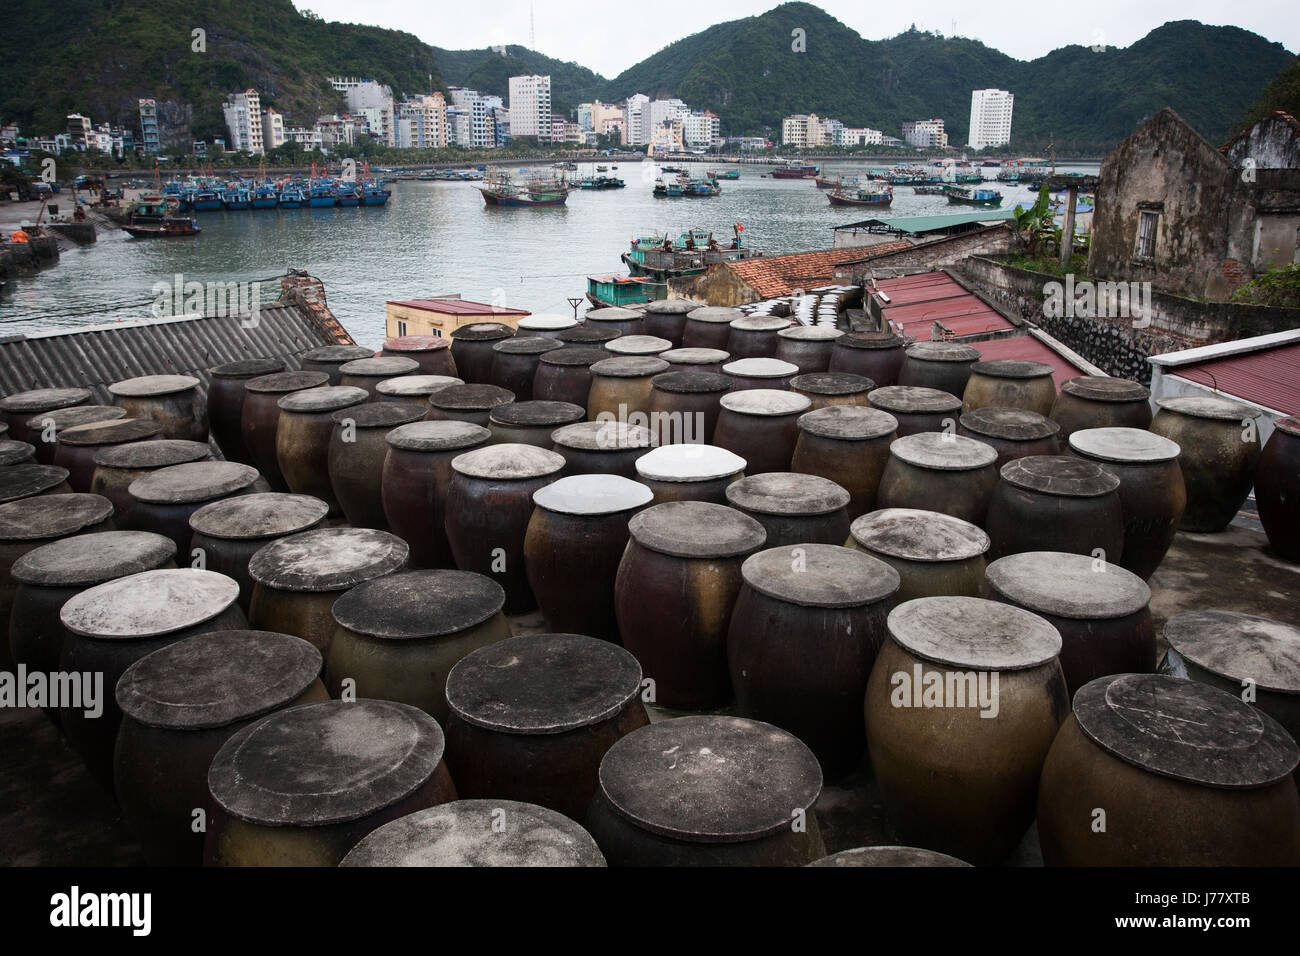 barrels-of-fermenting-fish-used-for-sauce-in-the-foreground-cat-ba-J77XTB.jpg